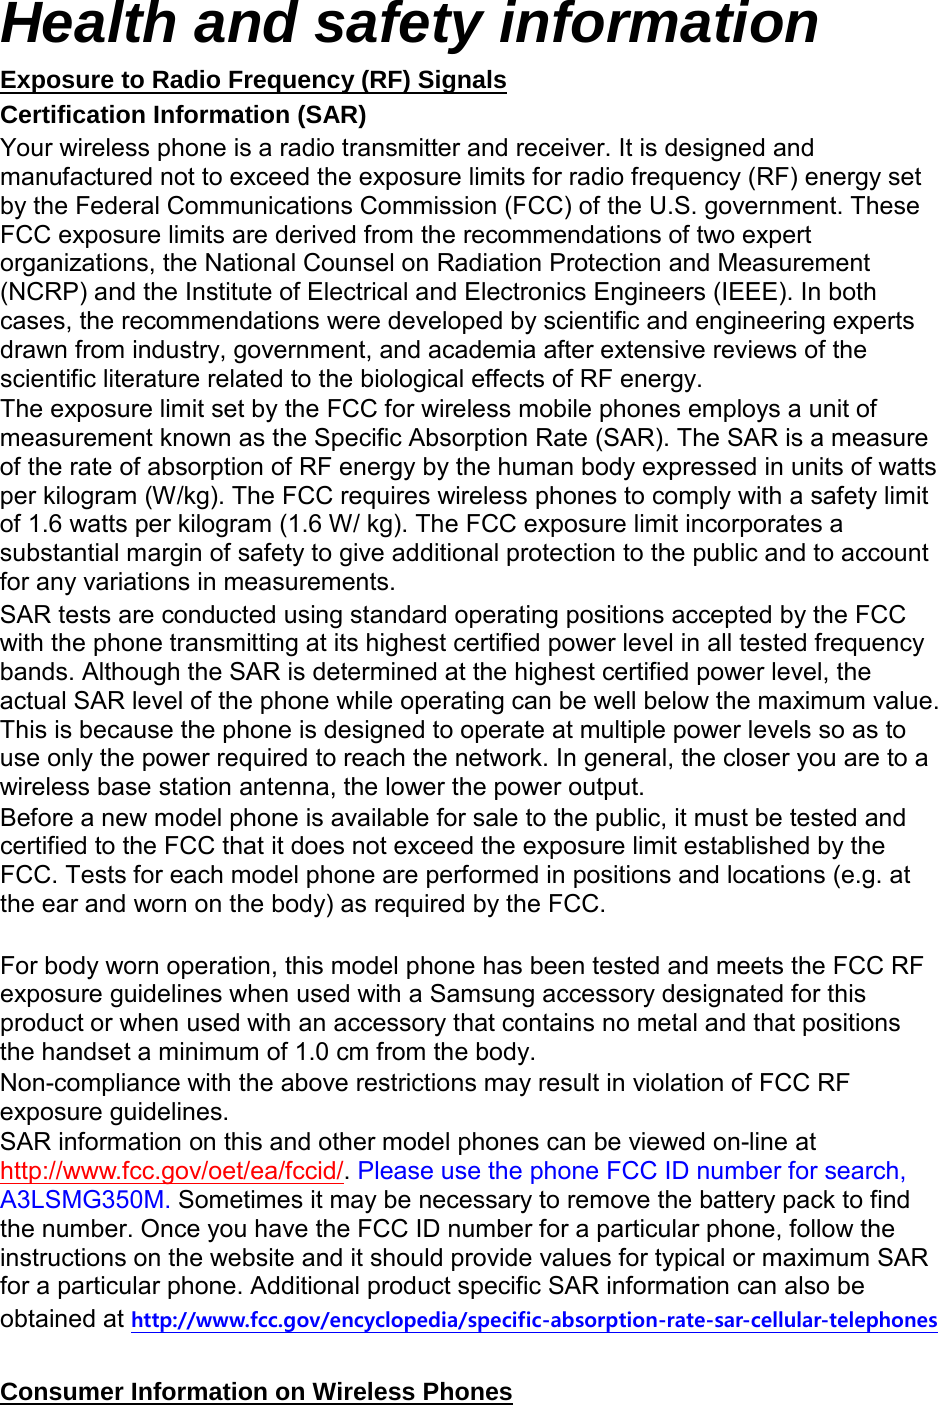 Health and safety information Exposure to Radio Frequency (RF) Signals Certification Information (SAR) Your wireless phone is a radio transmitter and receiver. It is designed and manufactured not to exceed the exposure limits for radio frequency (RF) energy set by the Federal Communications Commission (FCC) of the U.S. government. These FCC exposure limits are derived from the recommendations of two expert organizations, the National Counsel on Radiation Protection and Measurement (NCRP) and the Institute of Electrical and Electronics Engineers (IEEE). In both cases, the recommendations were developed by scientific and engineering experts drawn from industry, government, and academia after extensive reviews of the scientific literature related to the biological effects of RF energy. The exposure limit set by the FCC for wireless mobile phones employs a unit of measurement known as the Specific Absorption Rate (SAR). The SAR is a measure of the rate of absorption of RF energy by the human body expressed in units of watts per kilogram (W/kg). The FCC requires wireless phones to comply with a safety limit of 1.6 watts per kilogram (1.6 W/ kg). The FCC exposure limit incorporates a substantial margin of safety to give additional protection to the public and to account for any variations in measurements. SAR tests are conducted using standard operating positions accepted by the FCC with the phone transmitting at its highest certified power level in all tested frequency bands. Although the SAR is determined at the highest certified power level, the actual SAR level of the phone while operating can be well below the maximum value. This is because the phone is designed to operate at multiple power levels so as to use only the power required to reach the network. In general, the closer you are to a wireless base station antenna, the lower the power output. Before a new model phone is available for sale to the public, it must be tested and certified to the FCC that it does not exceed the exposure limit established by the FCC. Tests for each model phone are performed in positions and locations (e.g. at the ear and worn on the body) as required by the FCC.      For body worn operation, this model phone has been tested and meets the FCC RF exposure guidelines when used with a Samsung accessory designated for this product or when used with an accessory that contains no metal and that positions the handset a minimum of 1.0 cm from the body.   Non-compliance with the above restrictions may result in violation of FCC RF exposure guidelines. SAR information on this and other model phones can be viewed on-line at http://www.fcc.gov/oet/ea/fccid/. Please use the phone FCC ID number for search, A3LSMG350M. Sometimes it may be necessary to remove the battery pack to find the number. Once you have the FCC ID number for a particular phone, follow the instructions on the website and it should provide values for typical or maximum SAR for a particular phone. Additional product specific SAR information can also be obtained at http://www.fcc.gov/encyclopedia/specific-absorption-rate-sar-cellular-telephones  Consumer Information on Wireless Phones 